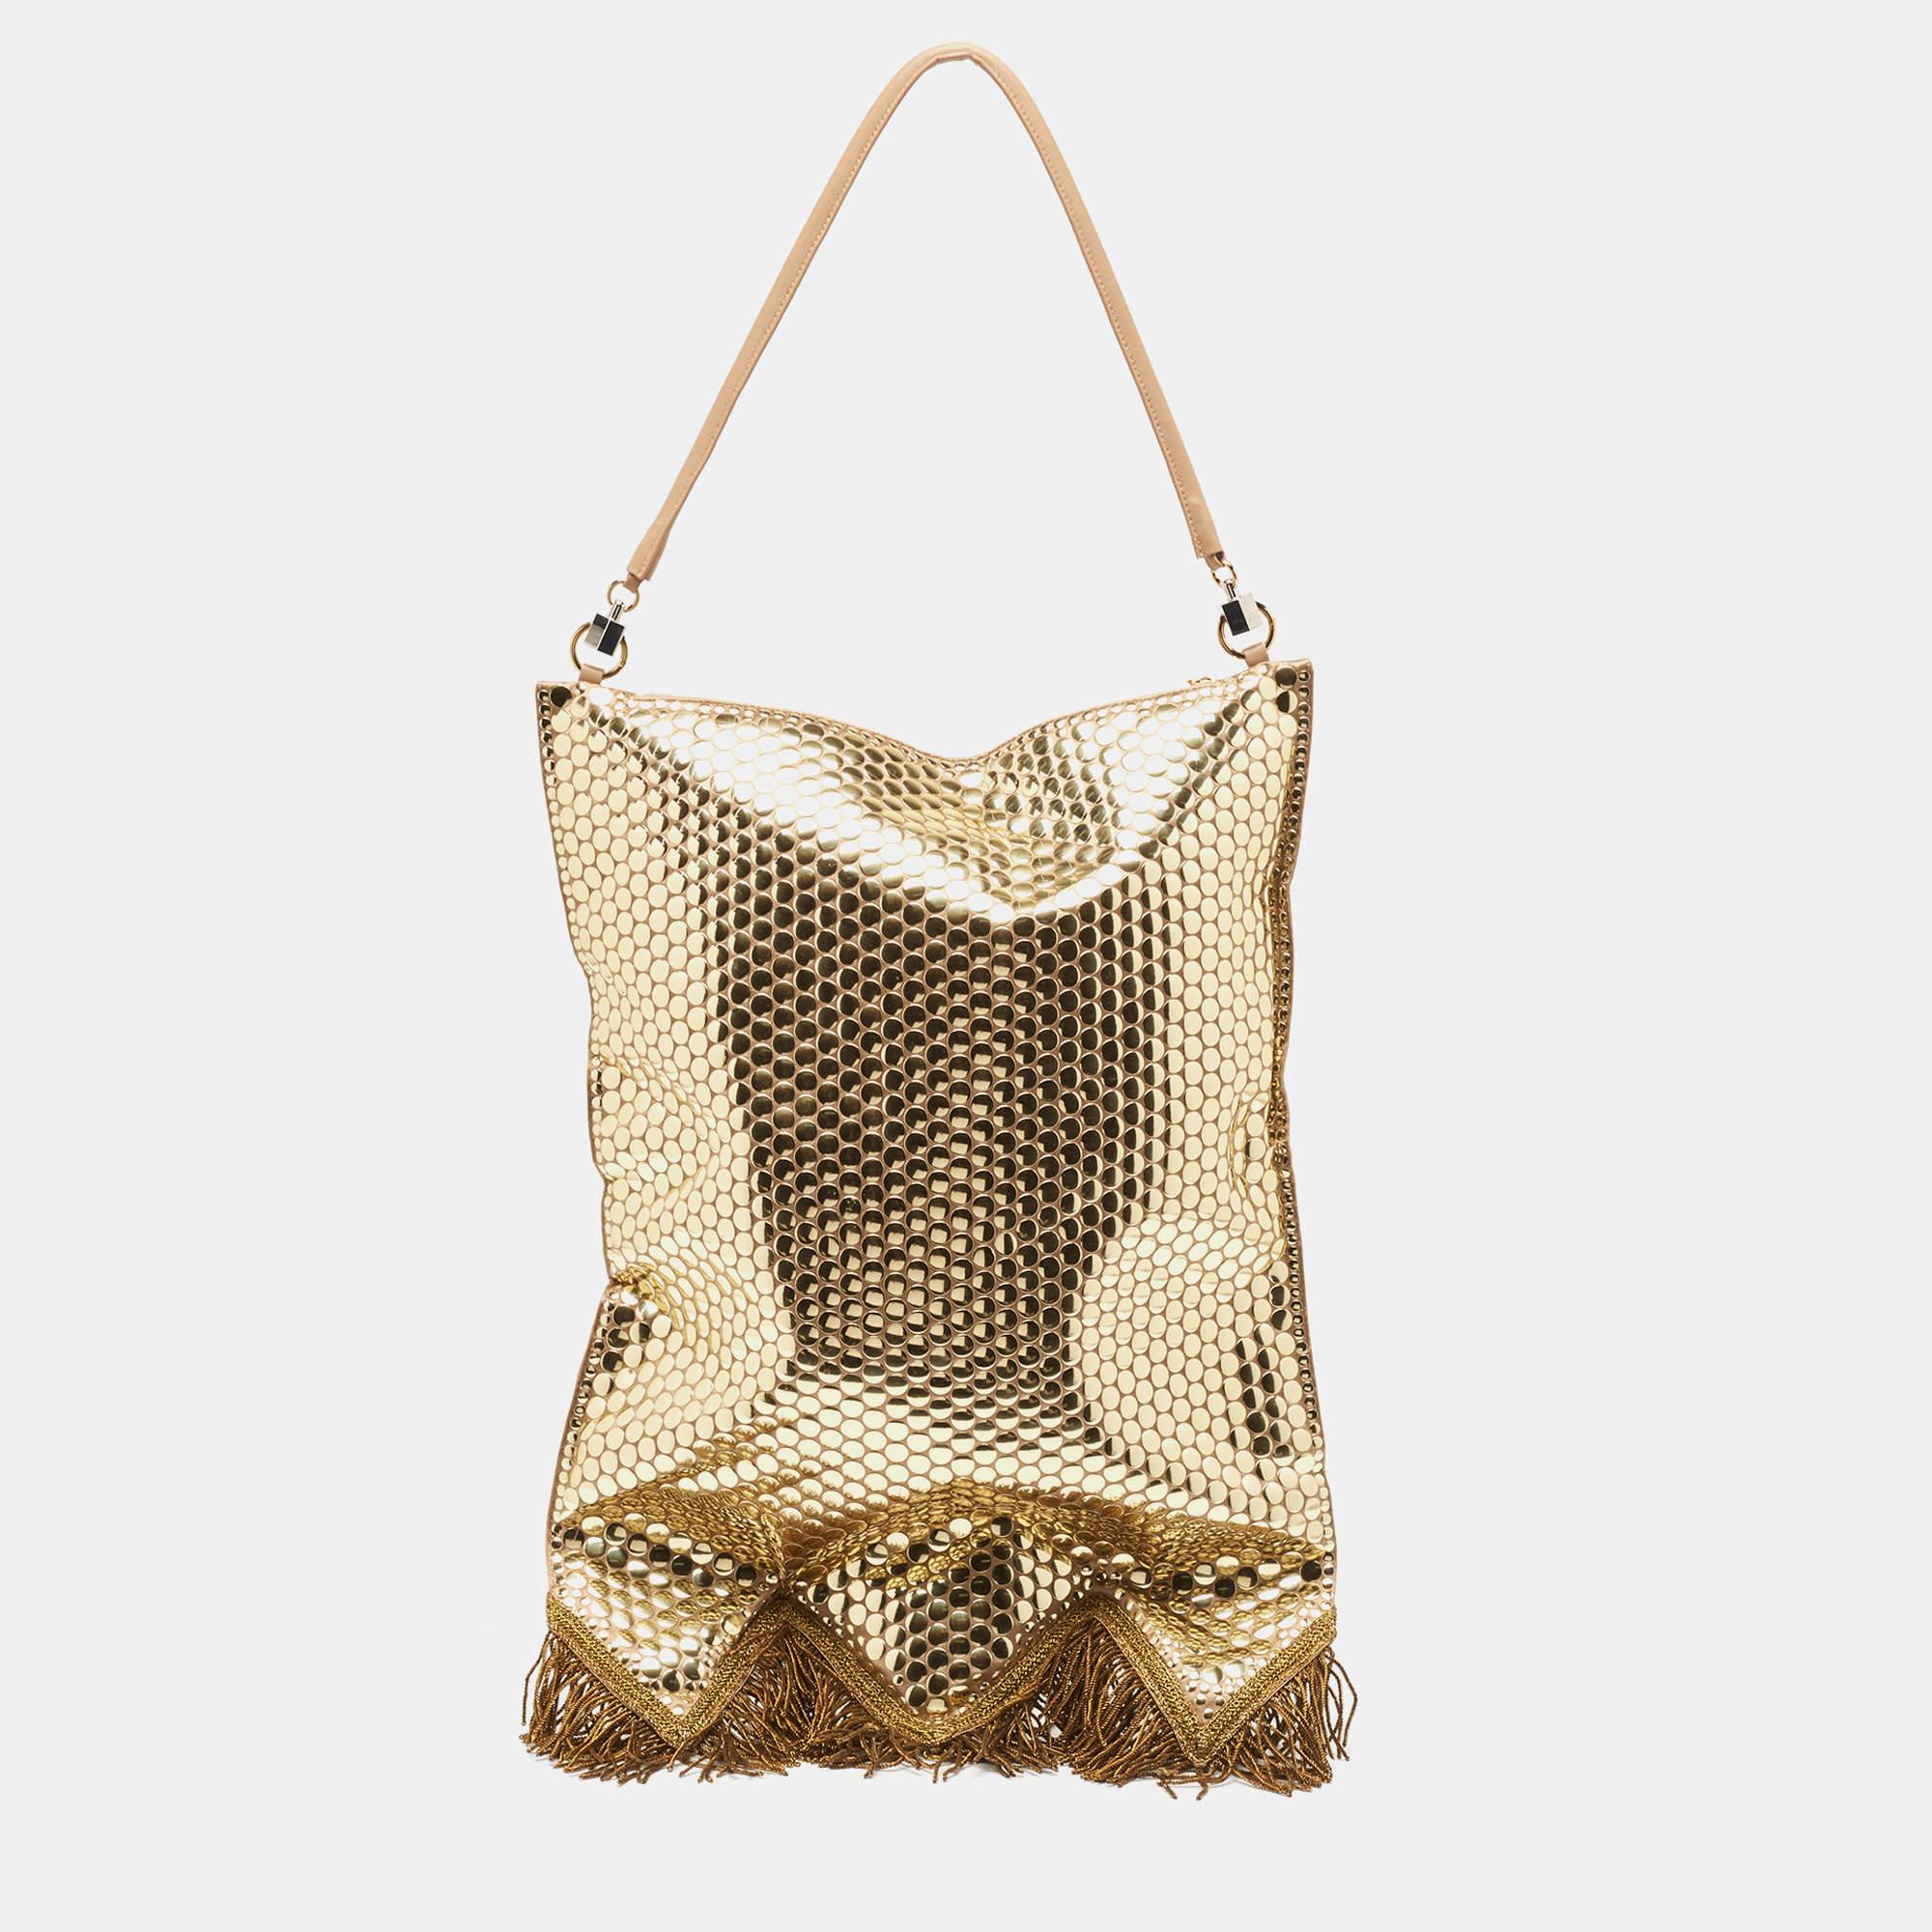 The Burberry bag is a luxurious fashion accessory. It features a satin body adorned with intricate gold bullion fringing and shimmering paillette embellishments. This statement piece exudes elegance and British heritage.

Includes: Original Dustbag,